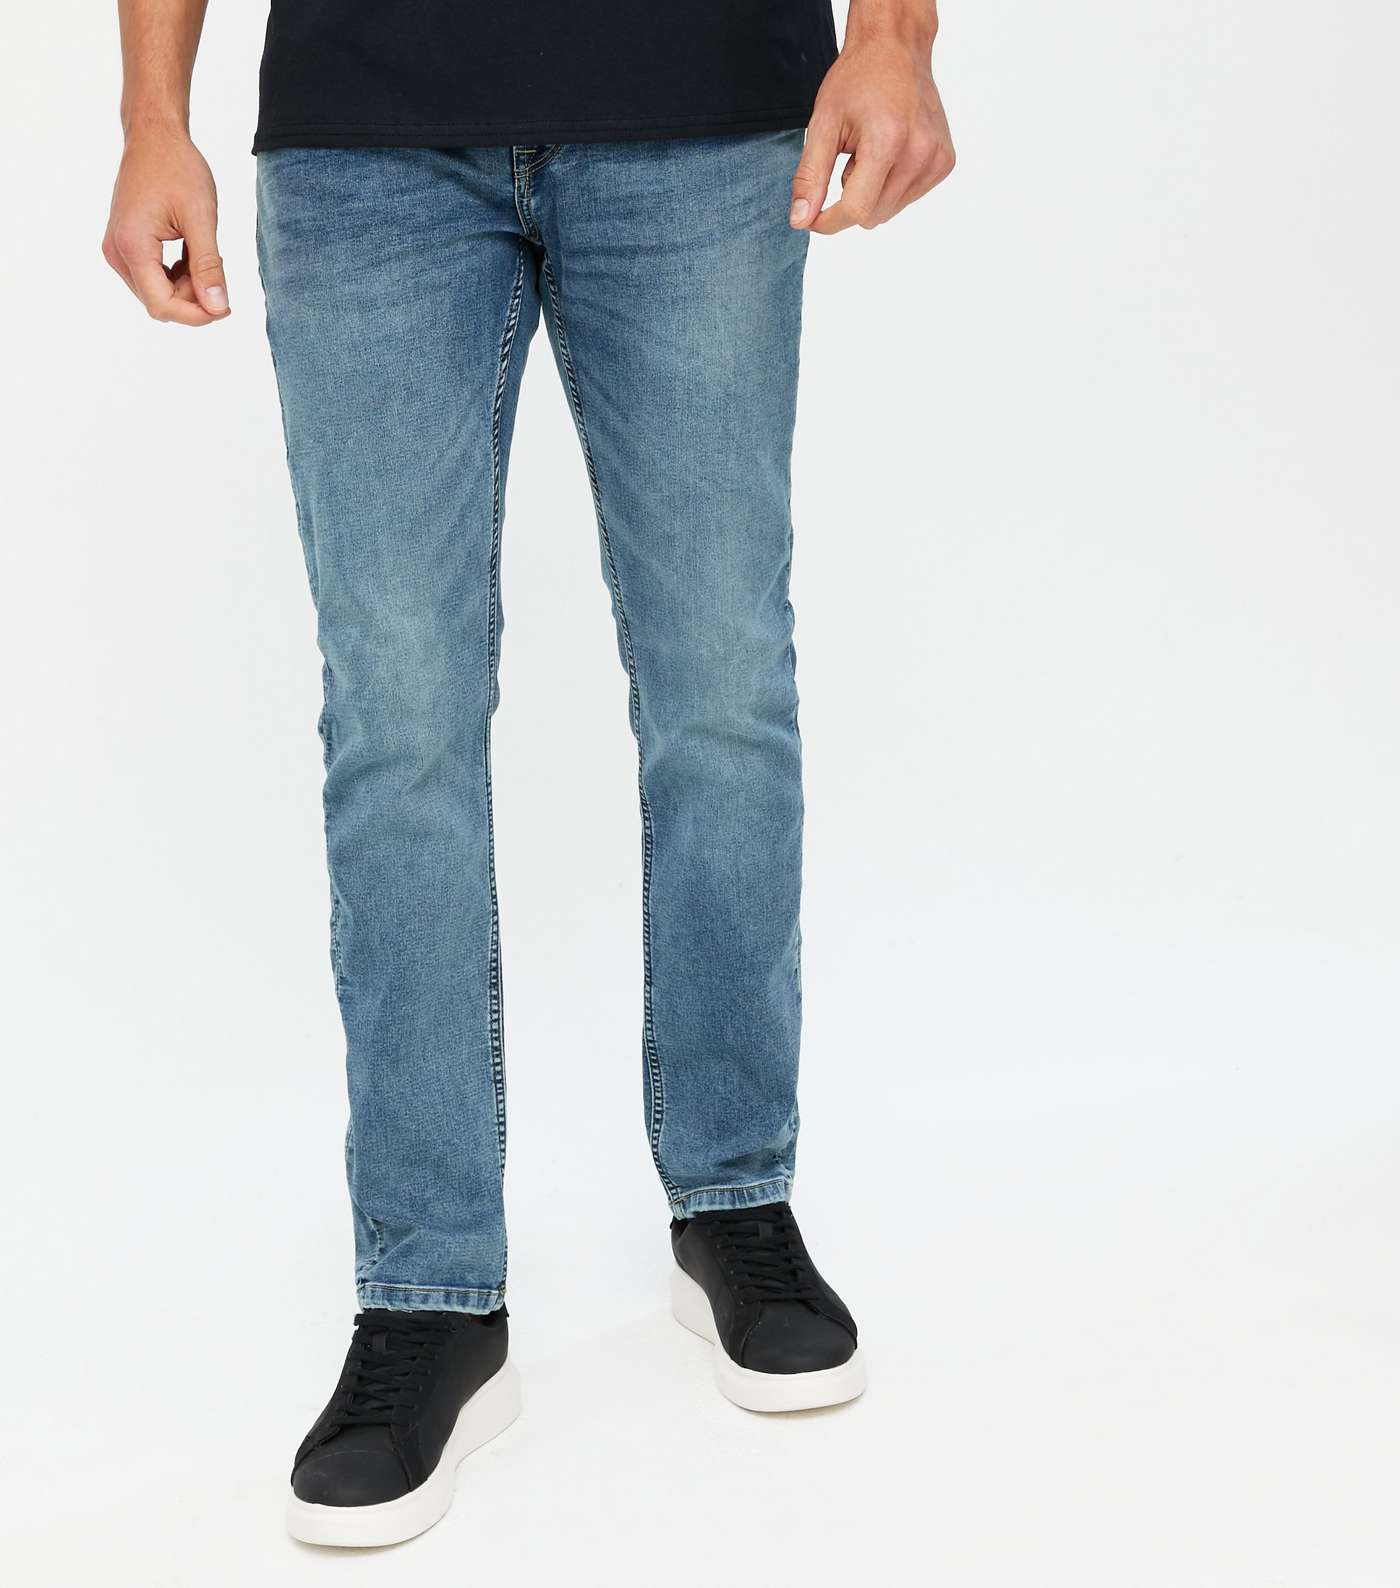 Only & Sons Bright Blue Slim Leg Jeans Image 2